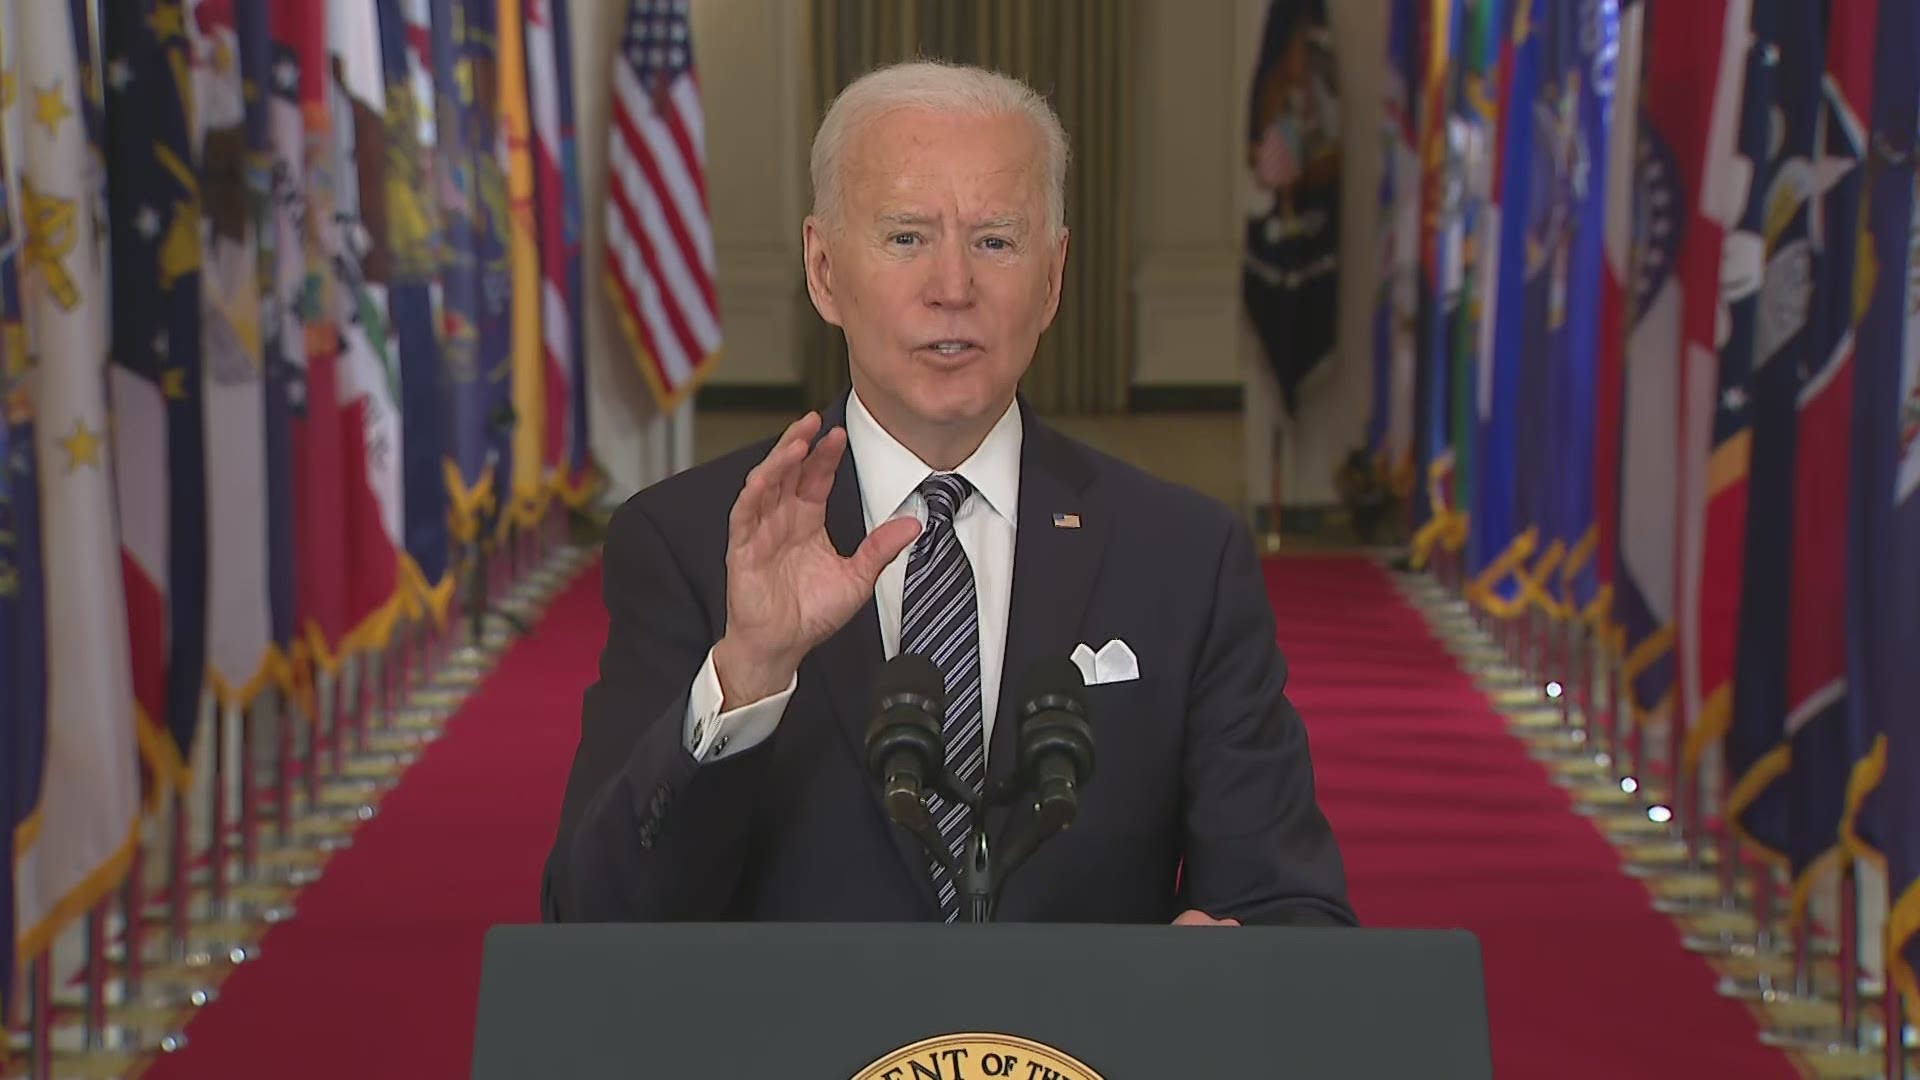 During his first primetime address, Biden urged Americans to get vaccinated for COVID-19, to continue wearing masks and keep practicing social distancing.